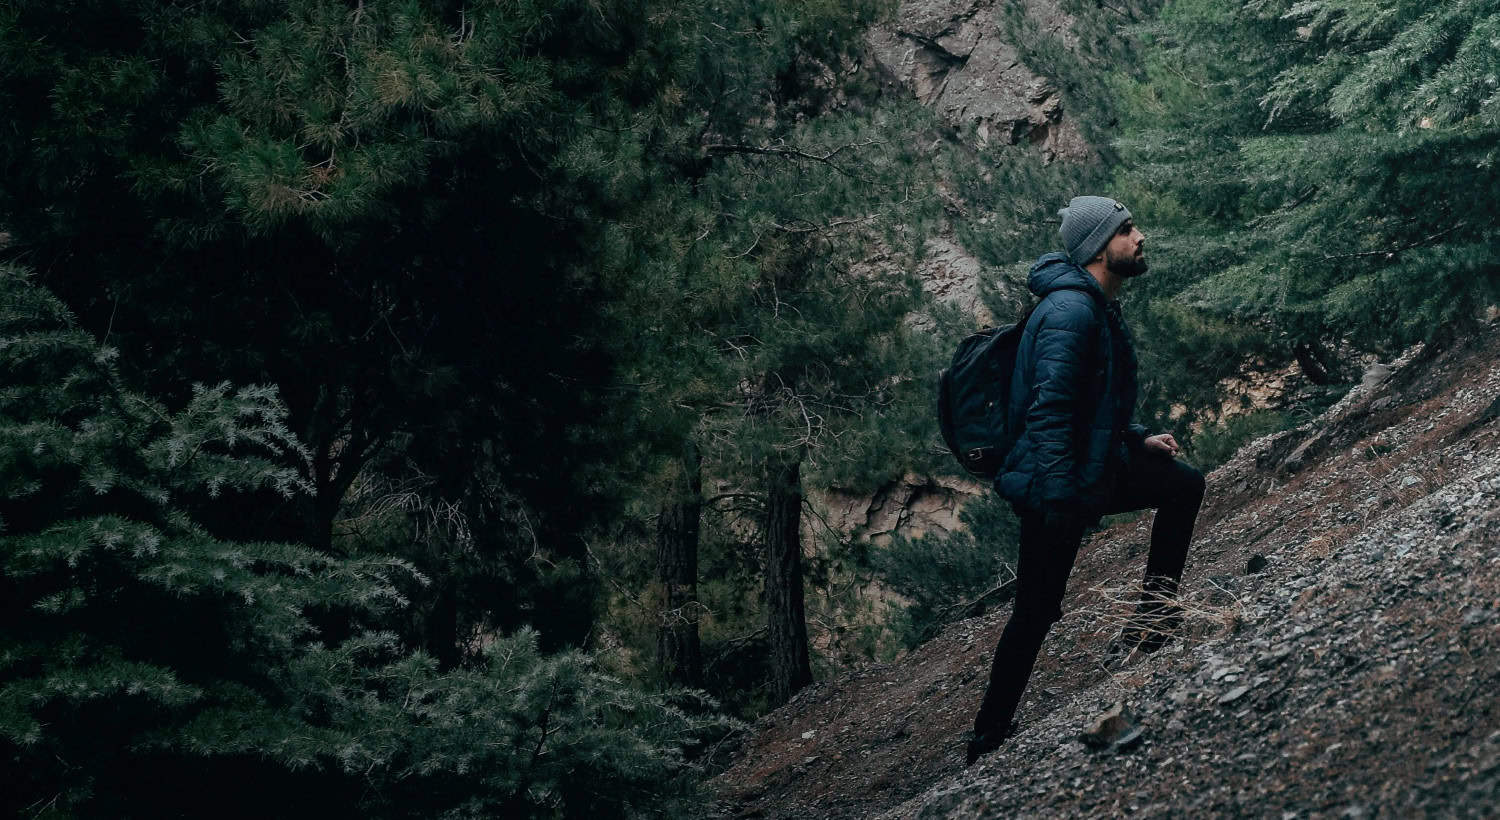 Background image of a person hiking.